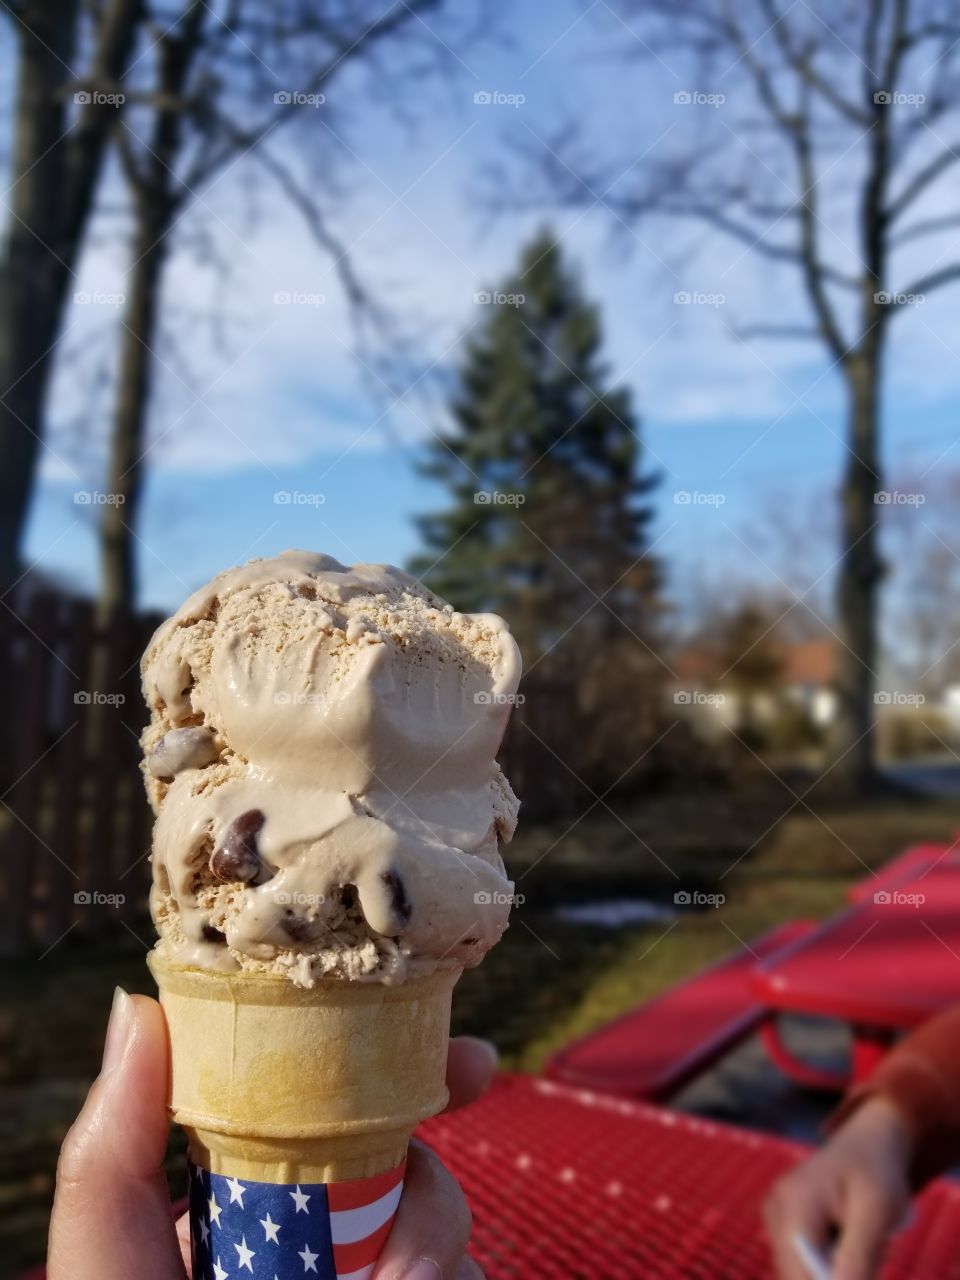 Felt so good to eat espresso bean flavored ice cream outdoors. It was a Sunday. Super bowl Sunday! It was one day in February that the weather got warm.